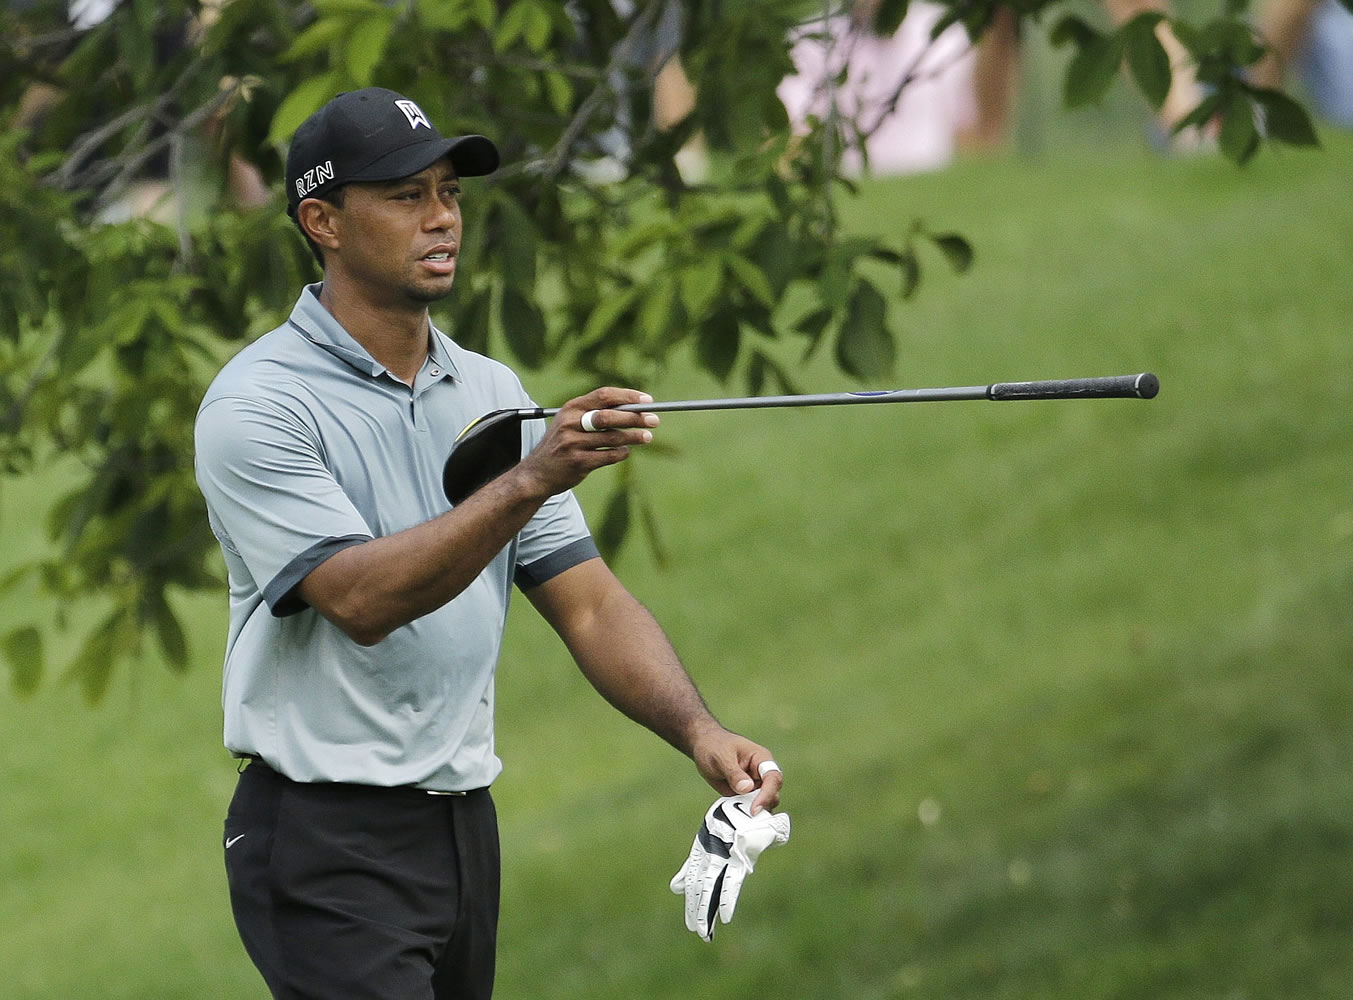 Tiger Woods points in the direction of his drive on the 11th hole during the second round of the Memorial golf tournament Friday in Dublin, Ohio.